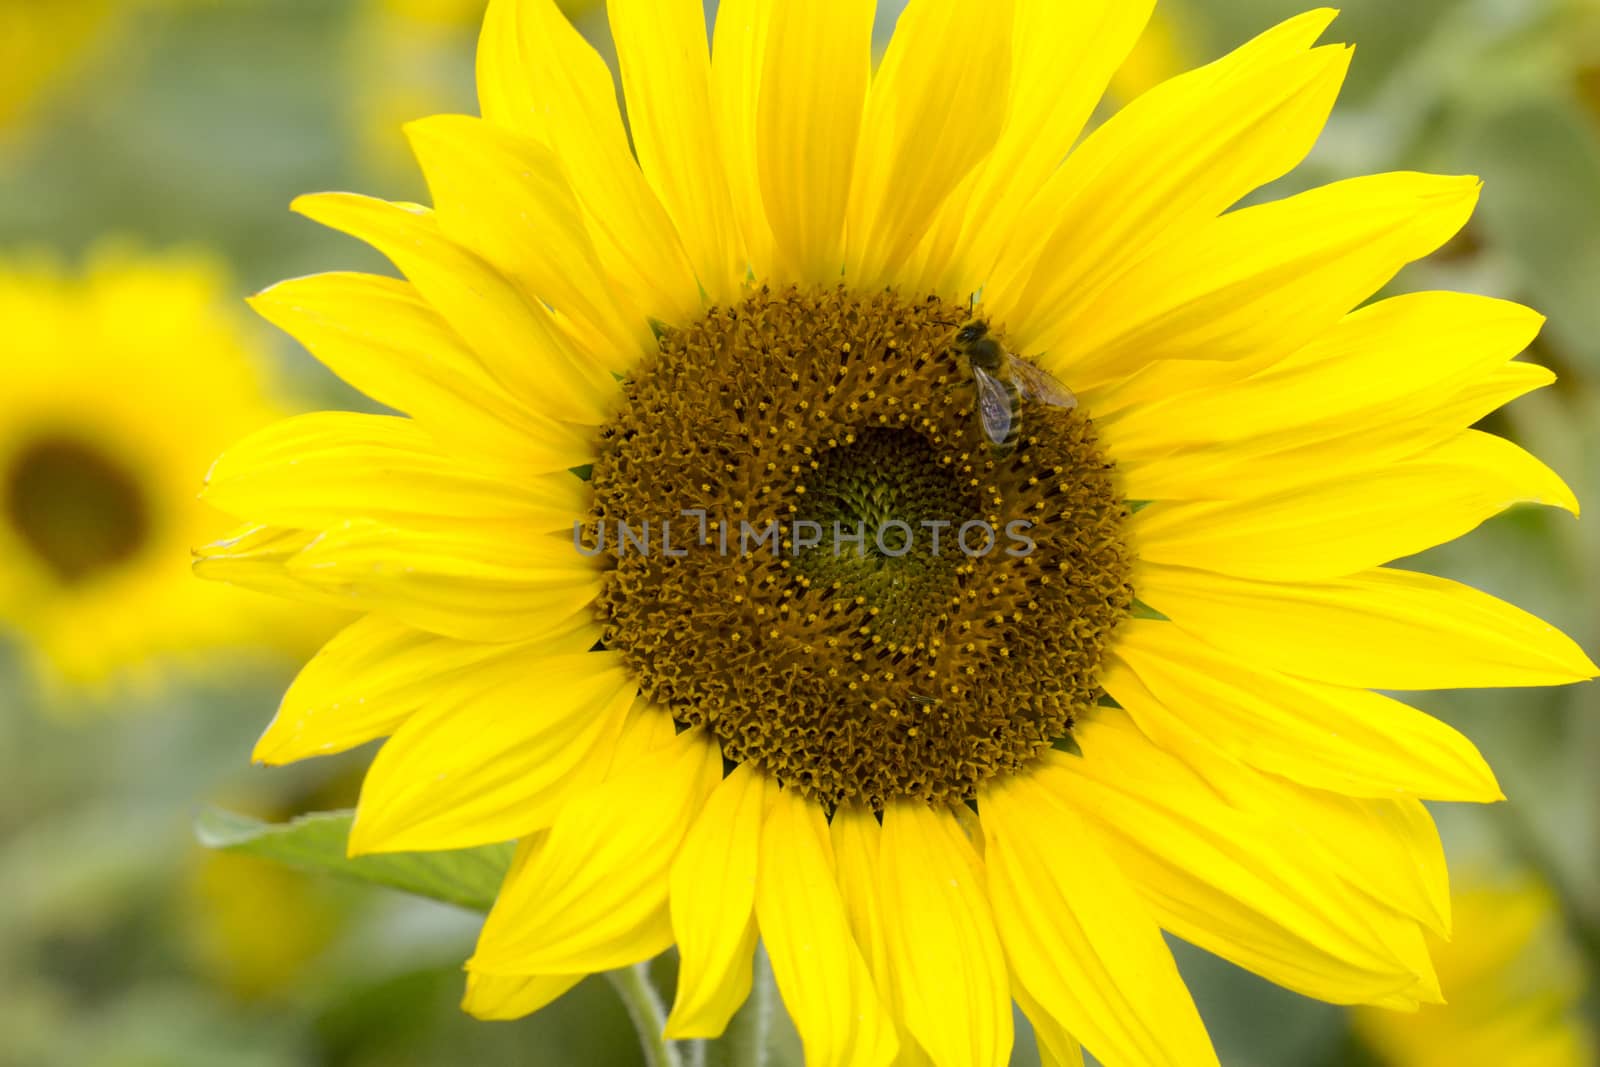 Sunflower with a bee by Fr@nk